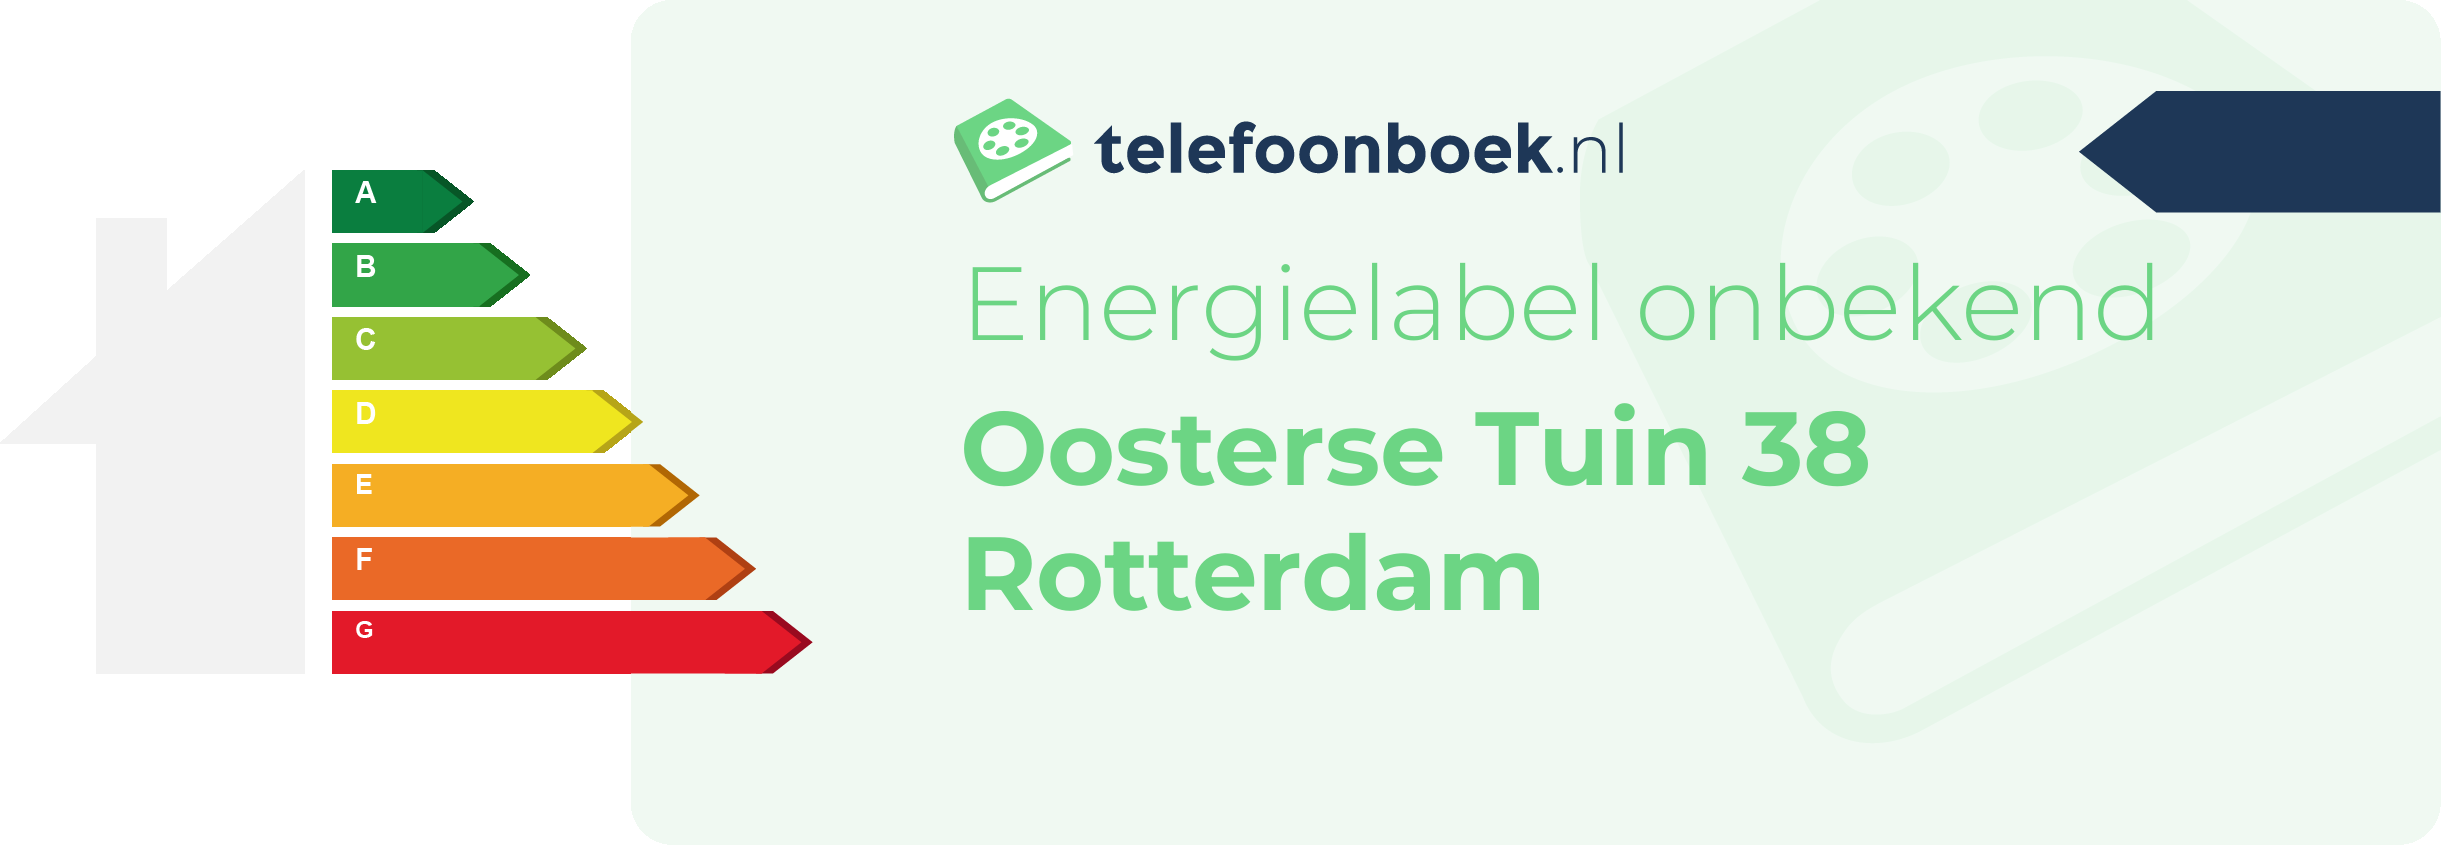 Energielabel Oosterse Tuin 38 Rotterdam